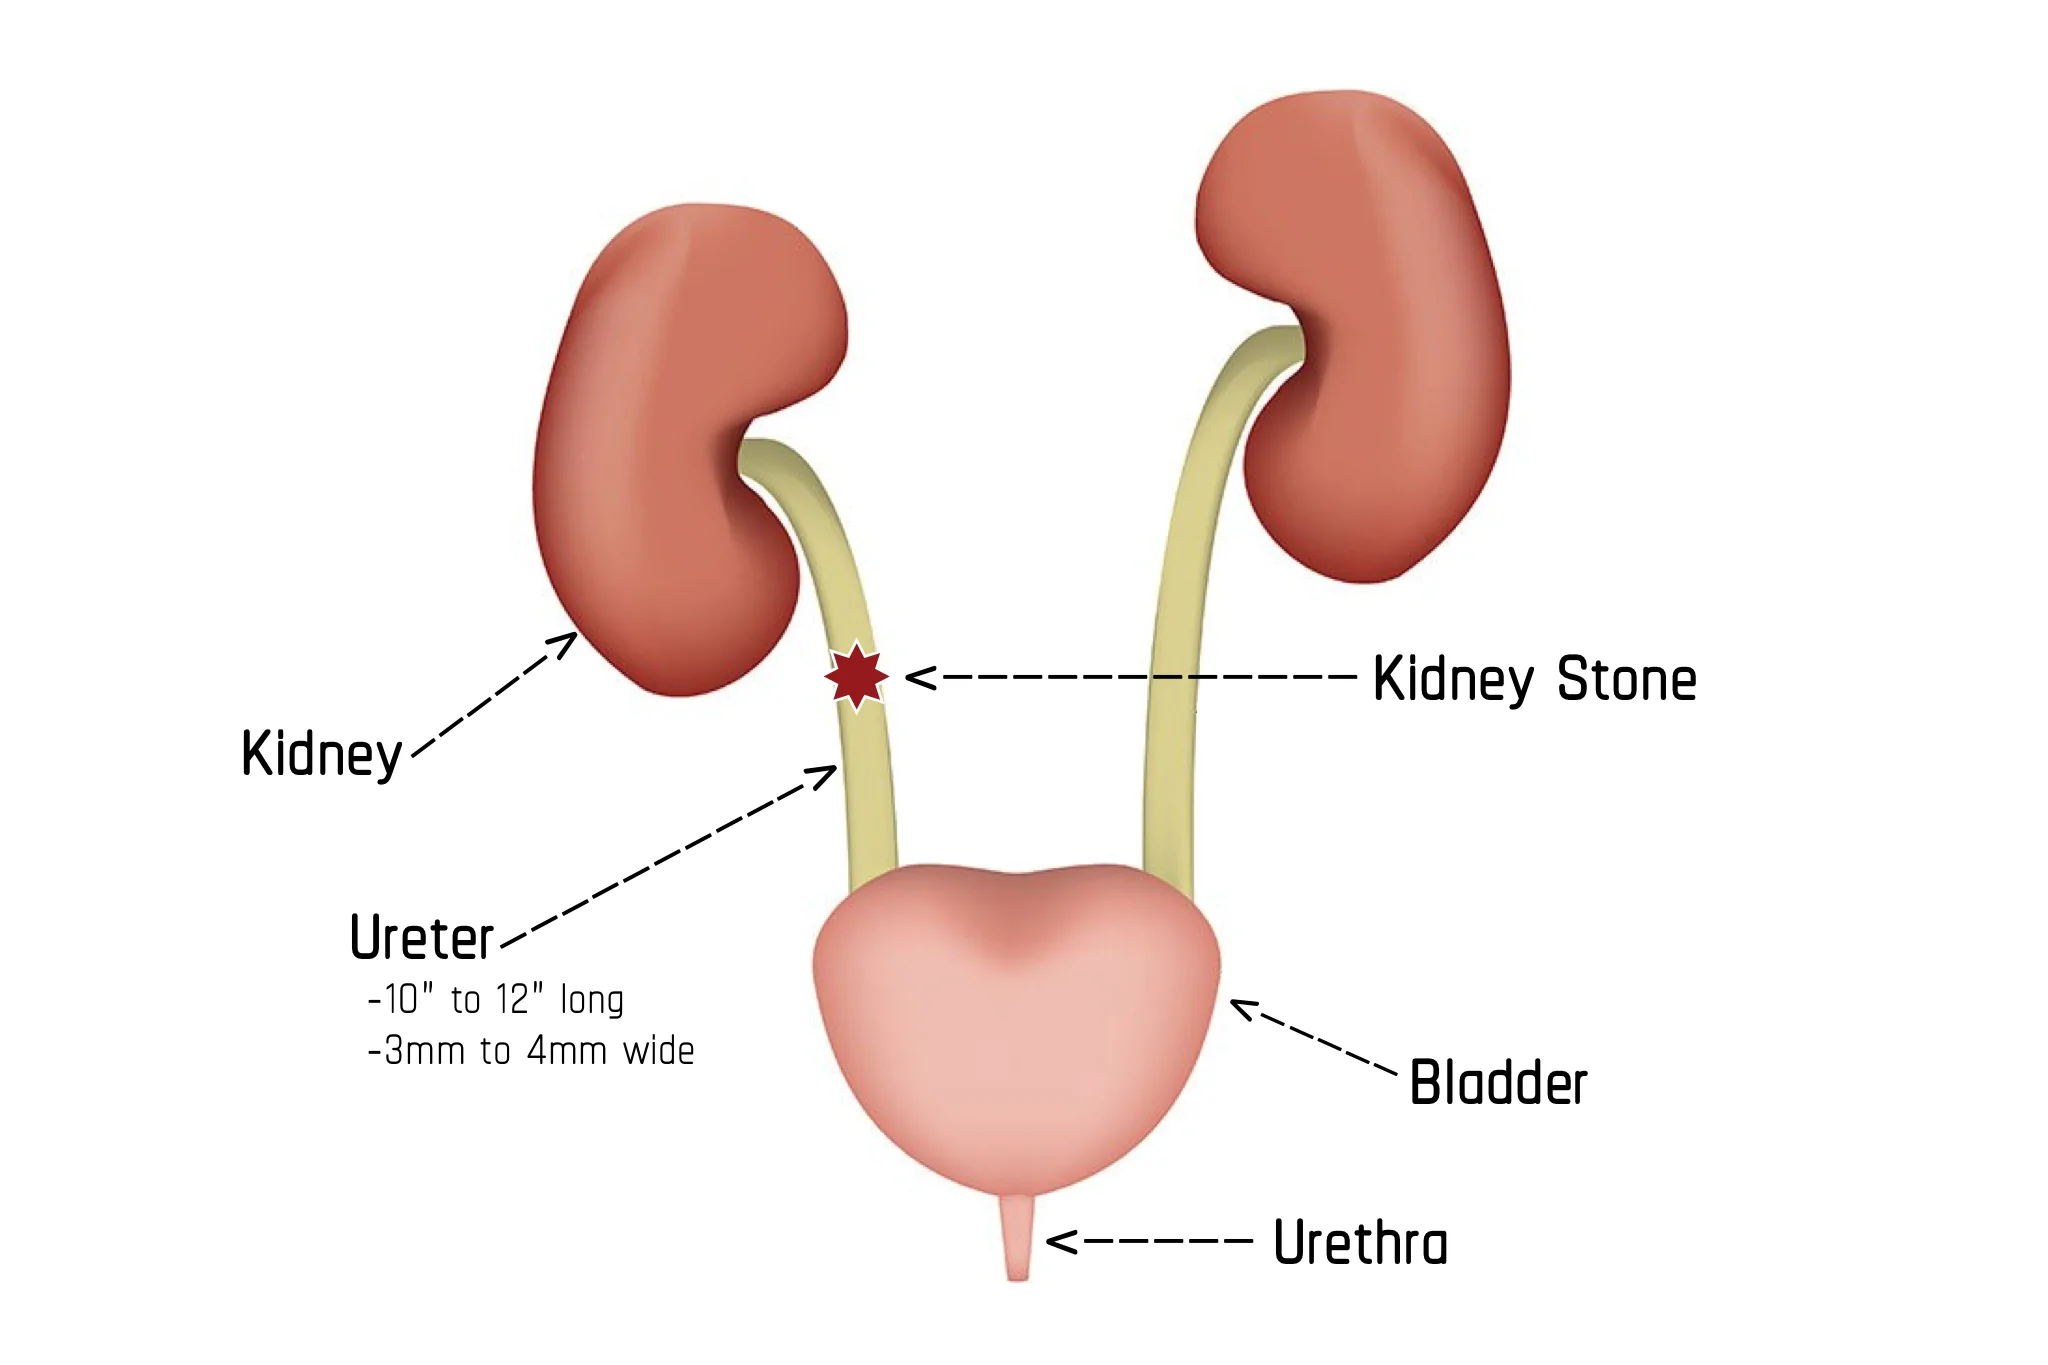 Illustration showing Stage 2 of Passing a Kidney Stone